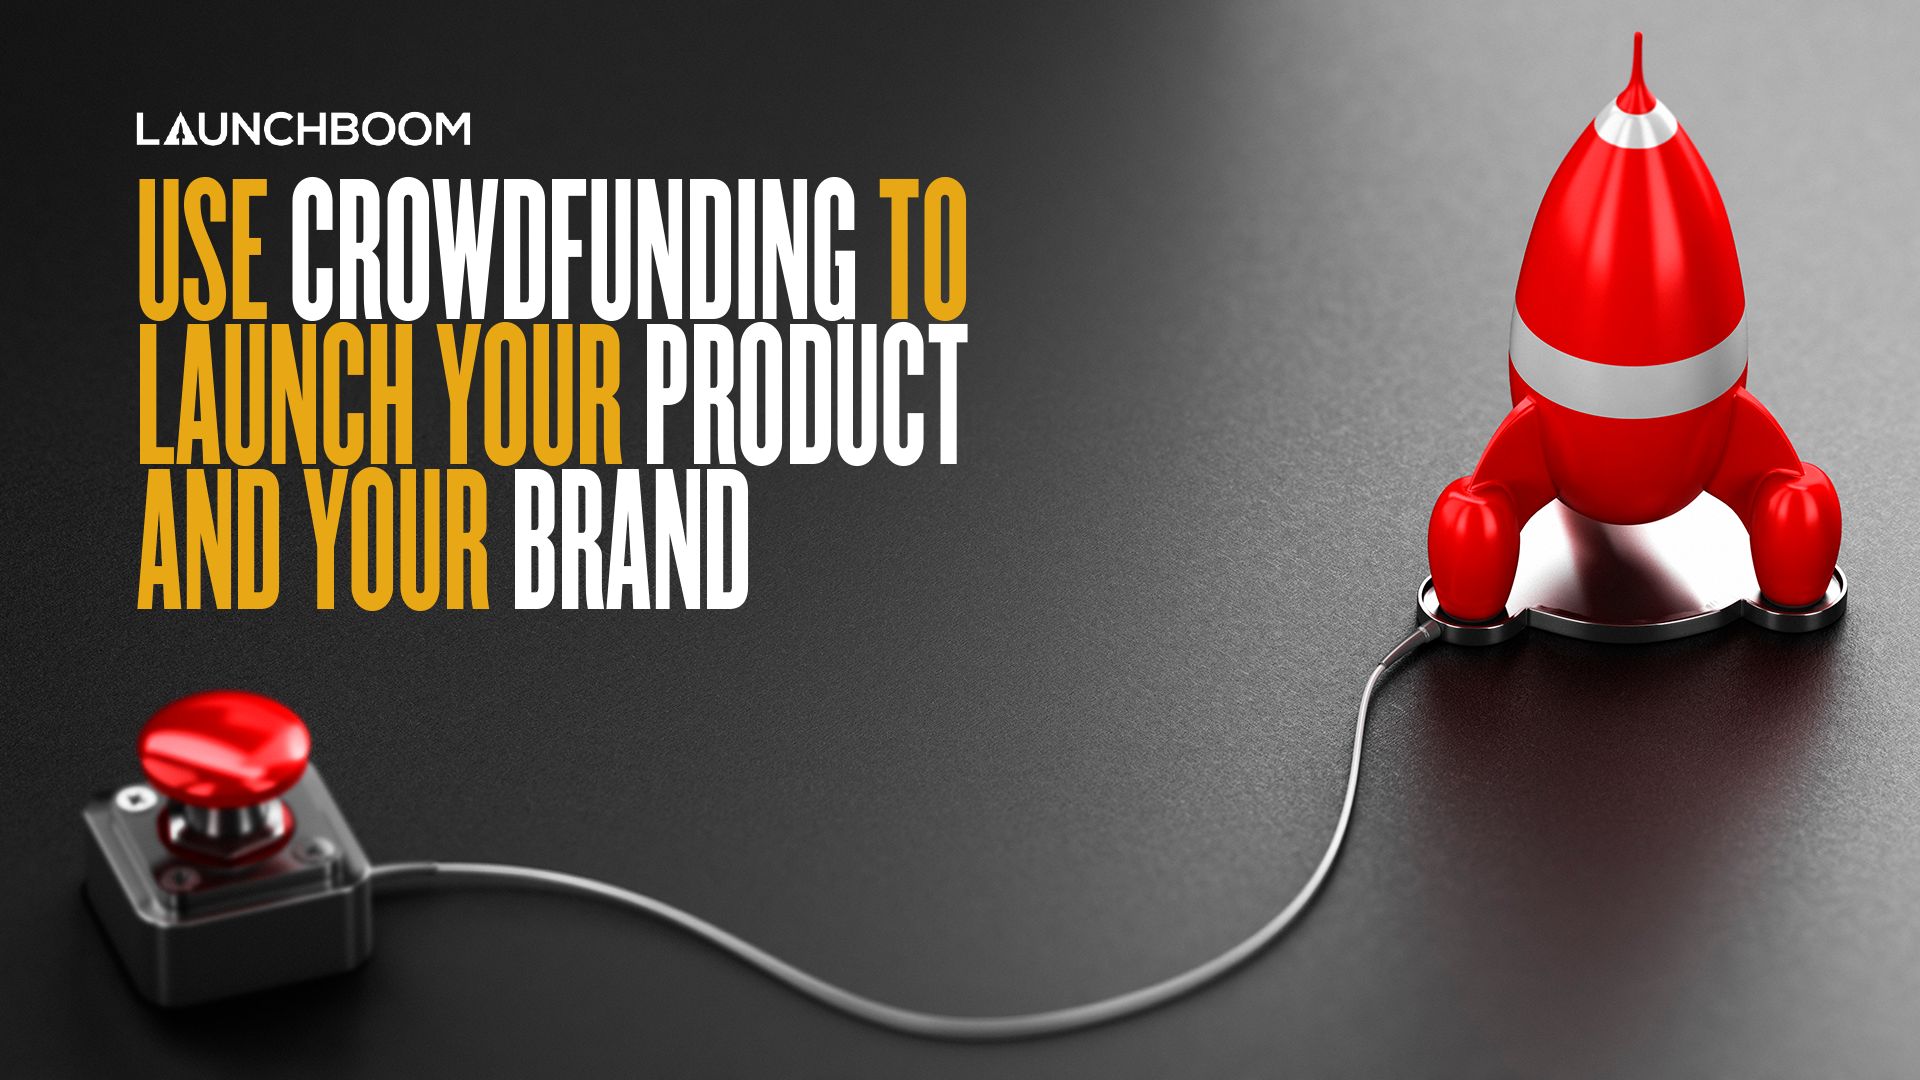 Use crowdfunding to launch your product and your brand